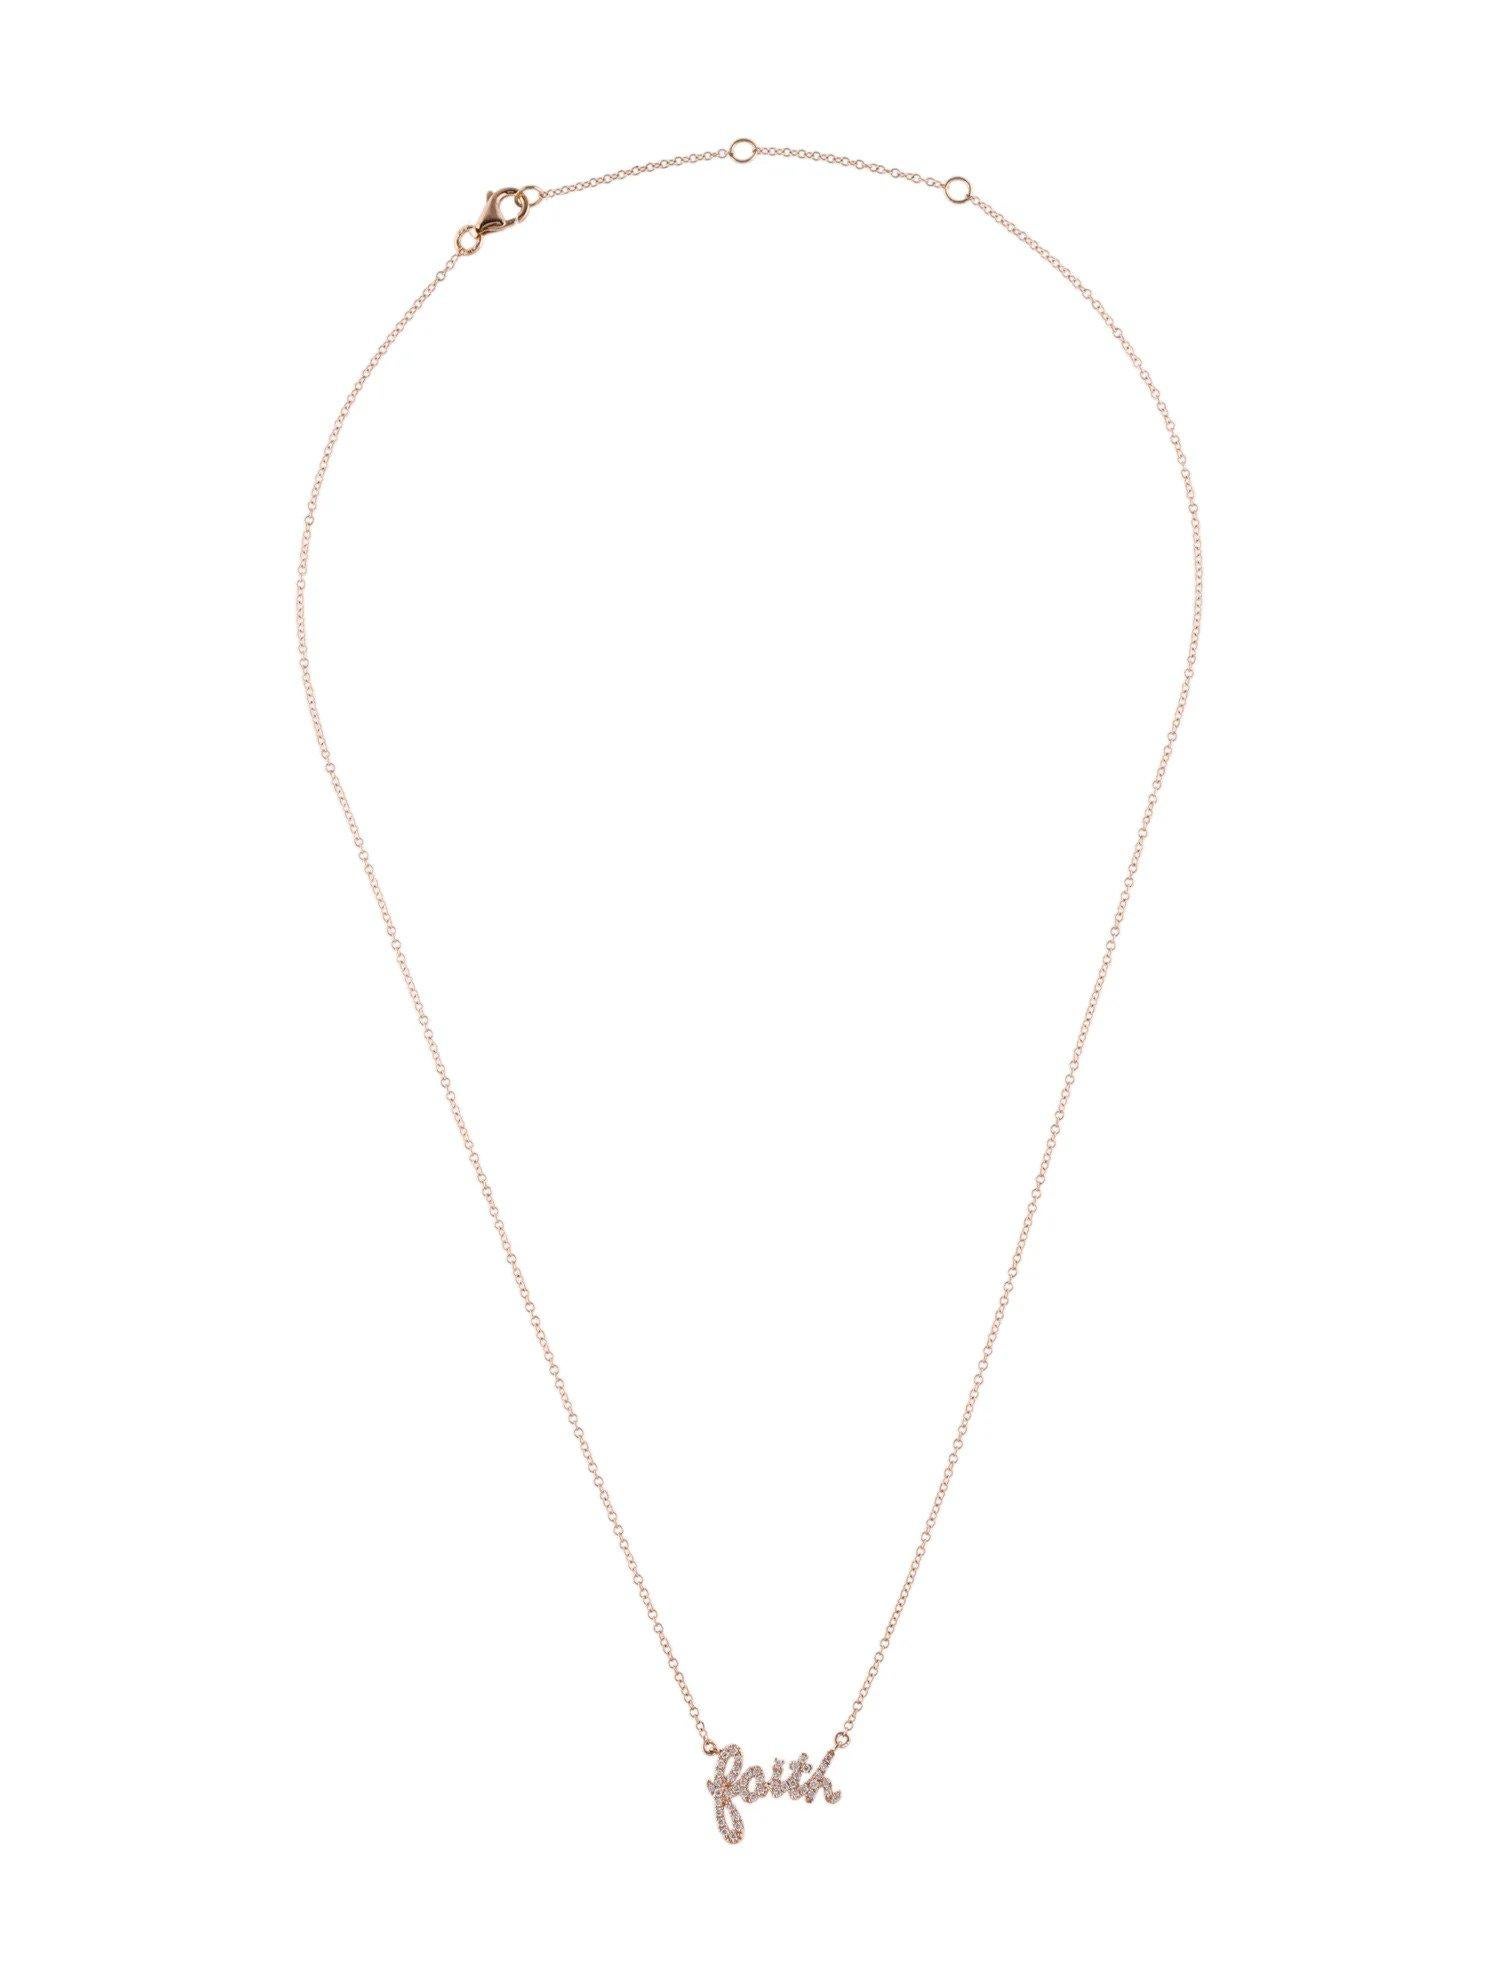 0.14 Carat Diamond Faith Rose Gold Pendant Necklace In New Condition For Sale In Great Neck, NY